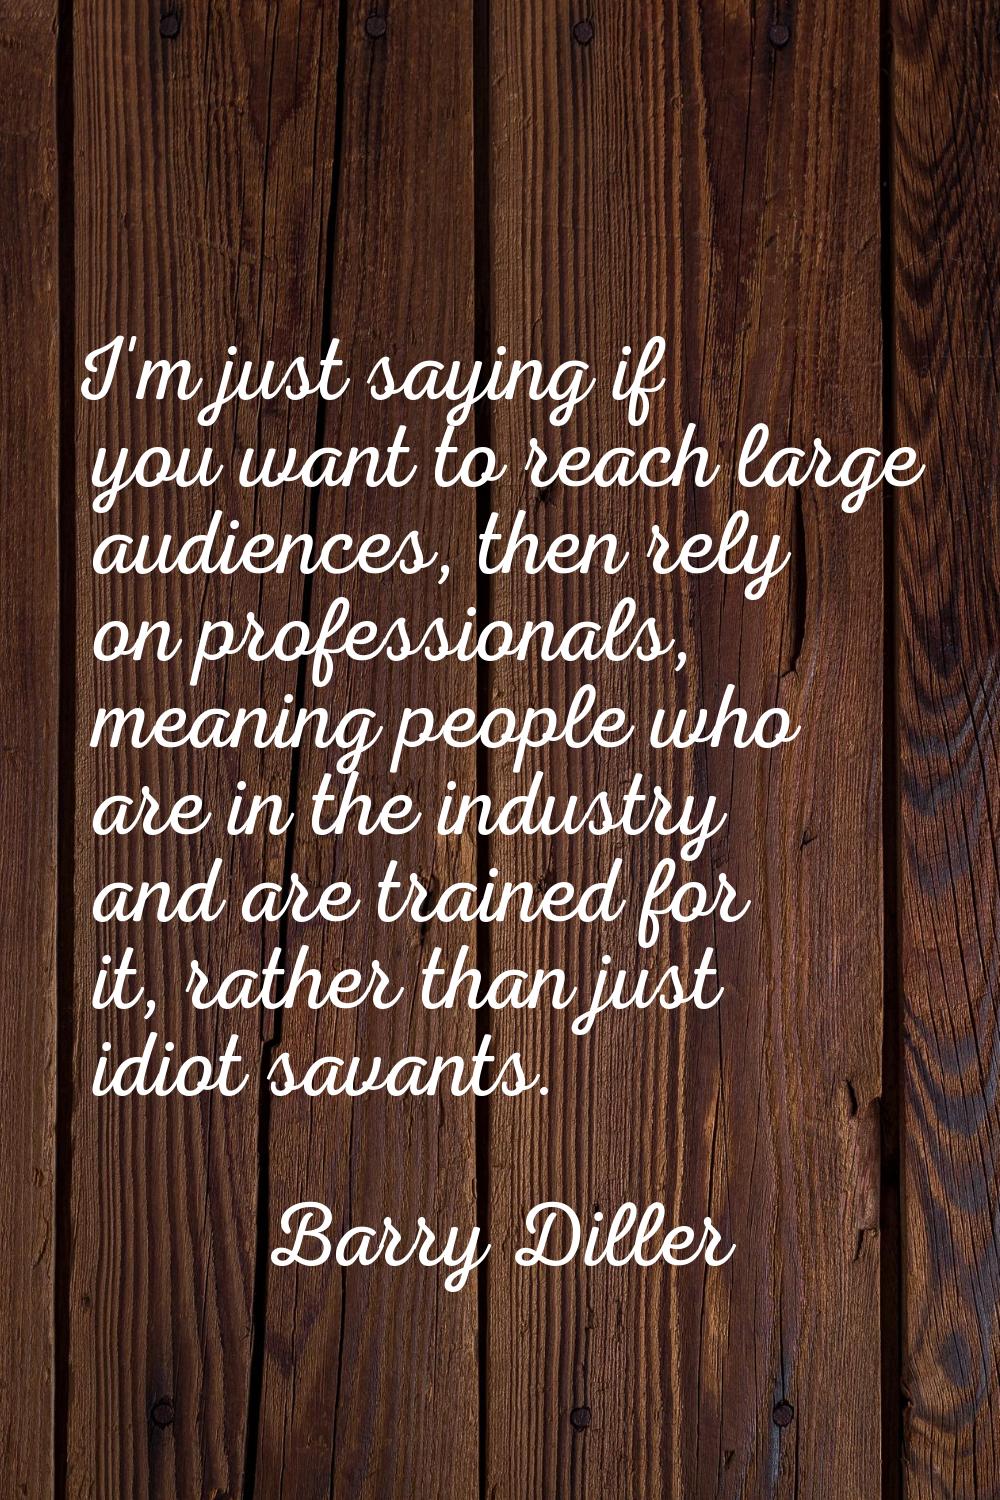 I'm just saying if you want to reach large audiences, then rely on professionals, meaning people wh